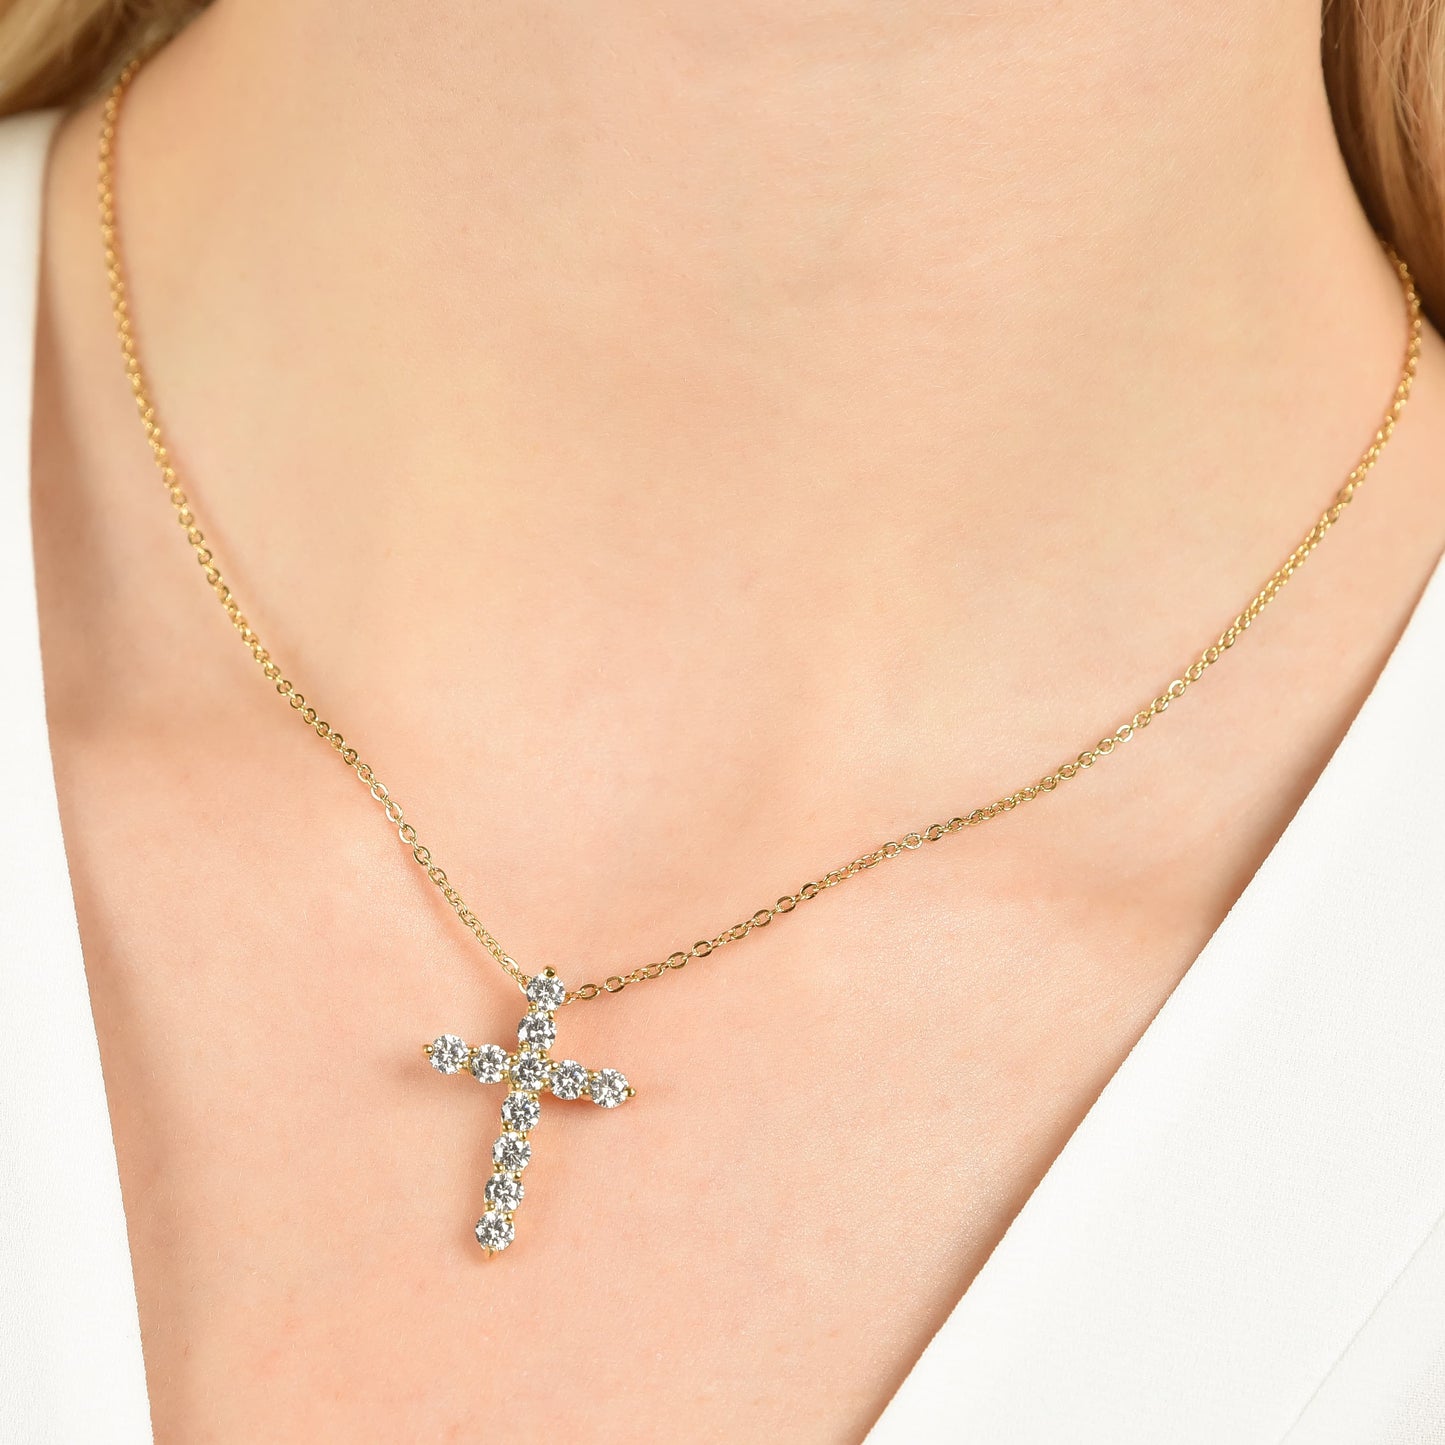 WOMAN'S NECKLACE IN IP GOLD STEEL WITH CROSS WITH WHITE CRYSTALS Luca Barra